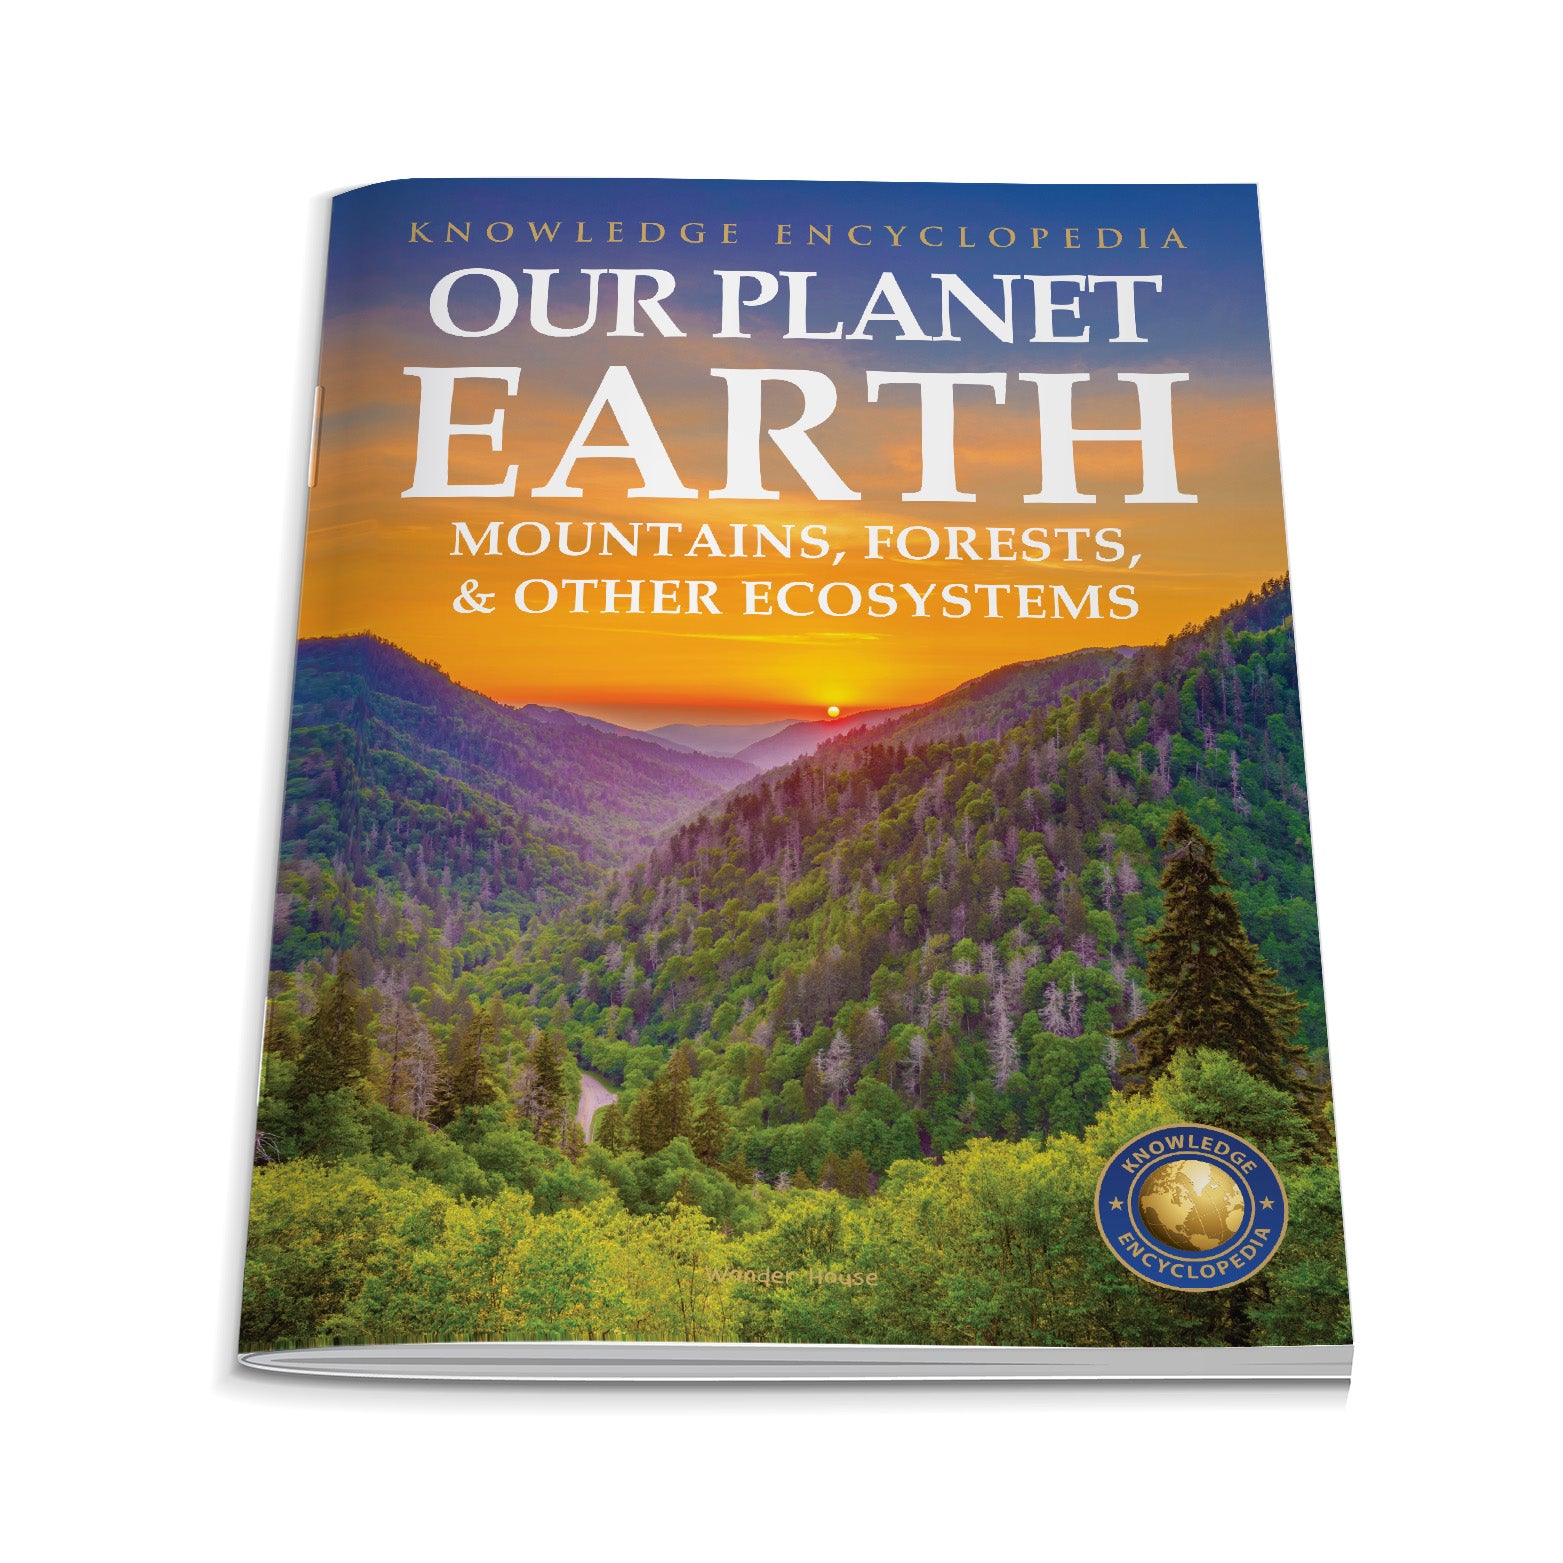 Knowledge Encyclopedia For Children - Our Planet Earth: Mountains, Forests & Other Ecosystems